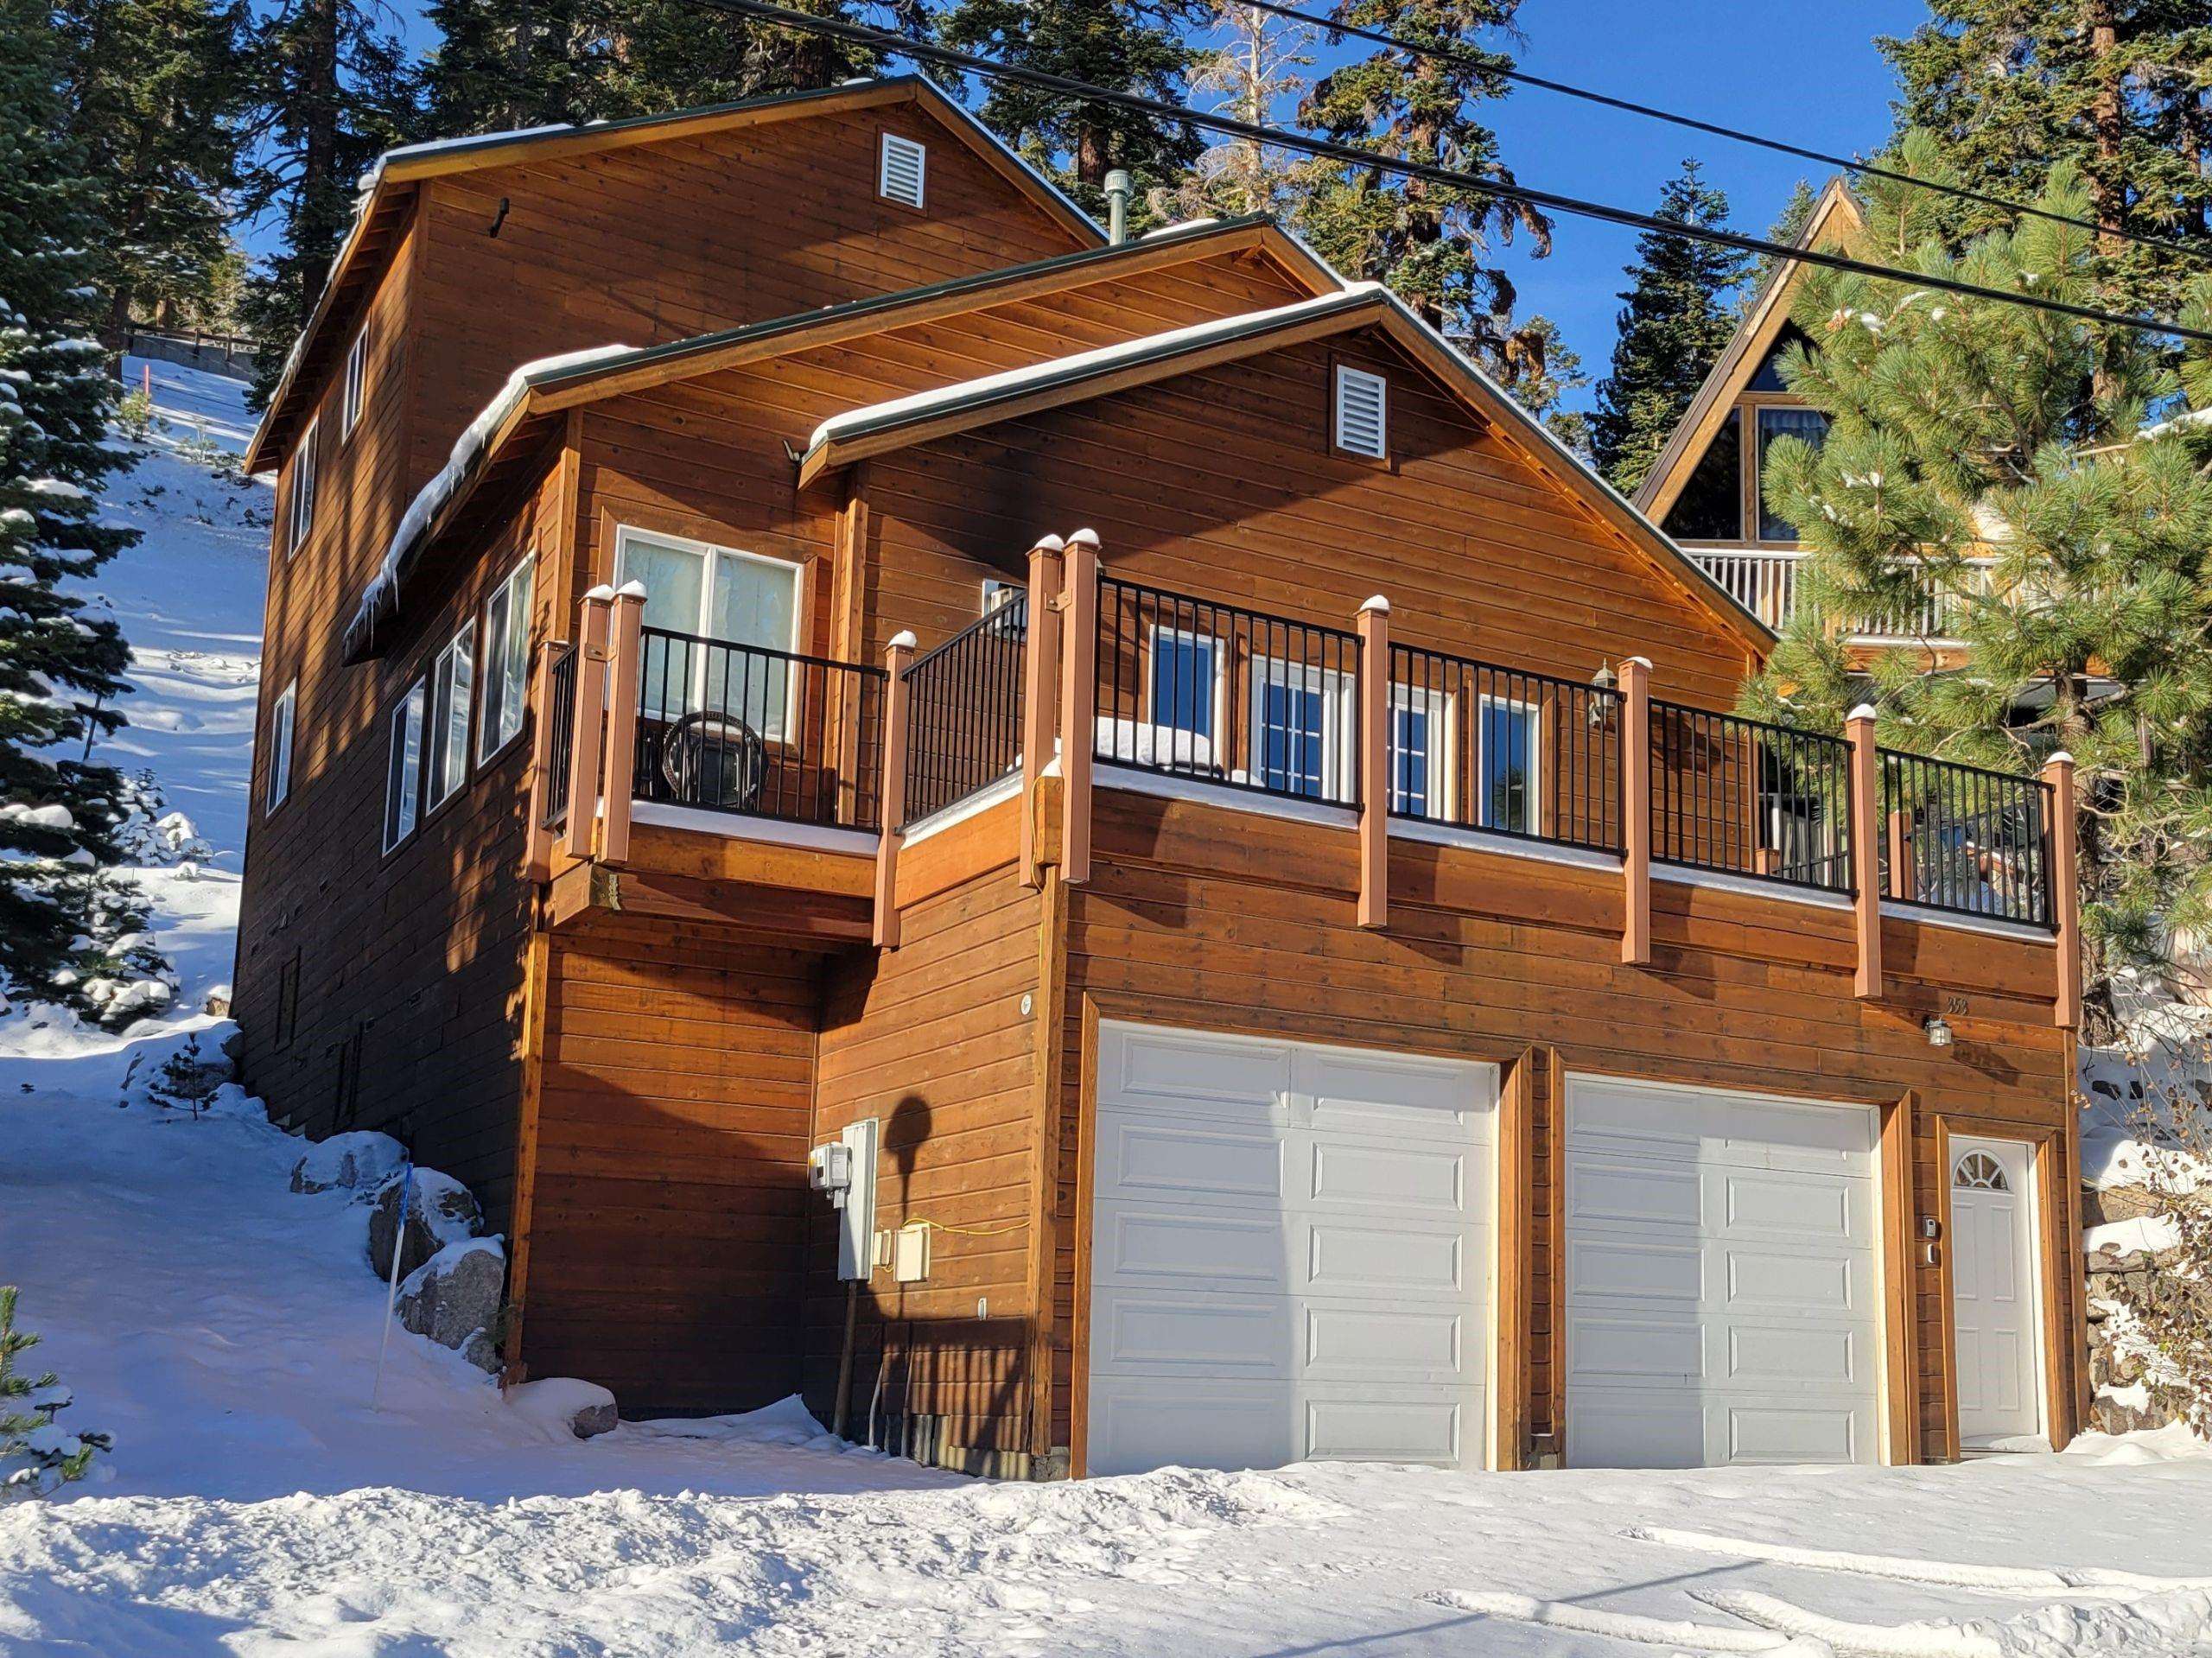 This home has it all – 4-bedrooms | 2.5-bathrooms, attached 2-car garage, large deck, views and is located about 200 yards away from ski-in / ski-out access just above Canyon Lodge.  The home was built in 2002 and offers custom wood floors, a metal roof, dual-paned windows throughout, new Trex decking, brand new hot water heater, new garage door, newer paint, window coverings, gas fireplace and the attached 2-car garage offers plenty of room for covered parking and storage for your toys and gear.  The abundance of windows and the French doors opening up to the deck provide plenty of natural light and allow for the views to be seen from throughout the home.  The large front deck is the ideal place to relax after a day of recreation or sit inside by the fire in the great room as you enjoy spending time with friends and family.  The great room also offers a great work area – ideal for those looking to balance work and play. The home has an amazing layout that will accommodate both large groups and small gatherings.  The property is sold furnished and turn-key – ready for your enjoyment!  The home has been very well maintained and is cared for by an absentee homeowner service while not being enjoyed by the homeowner.